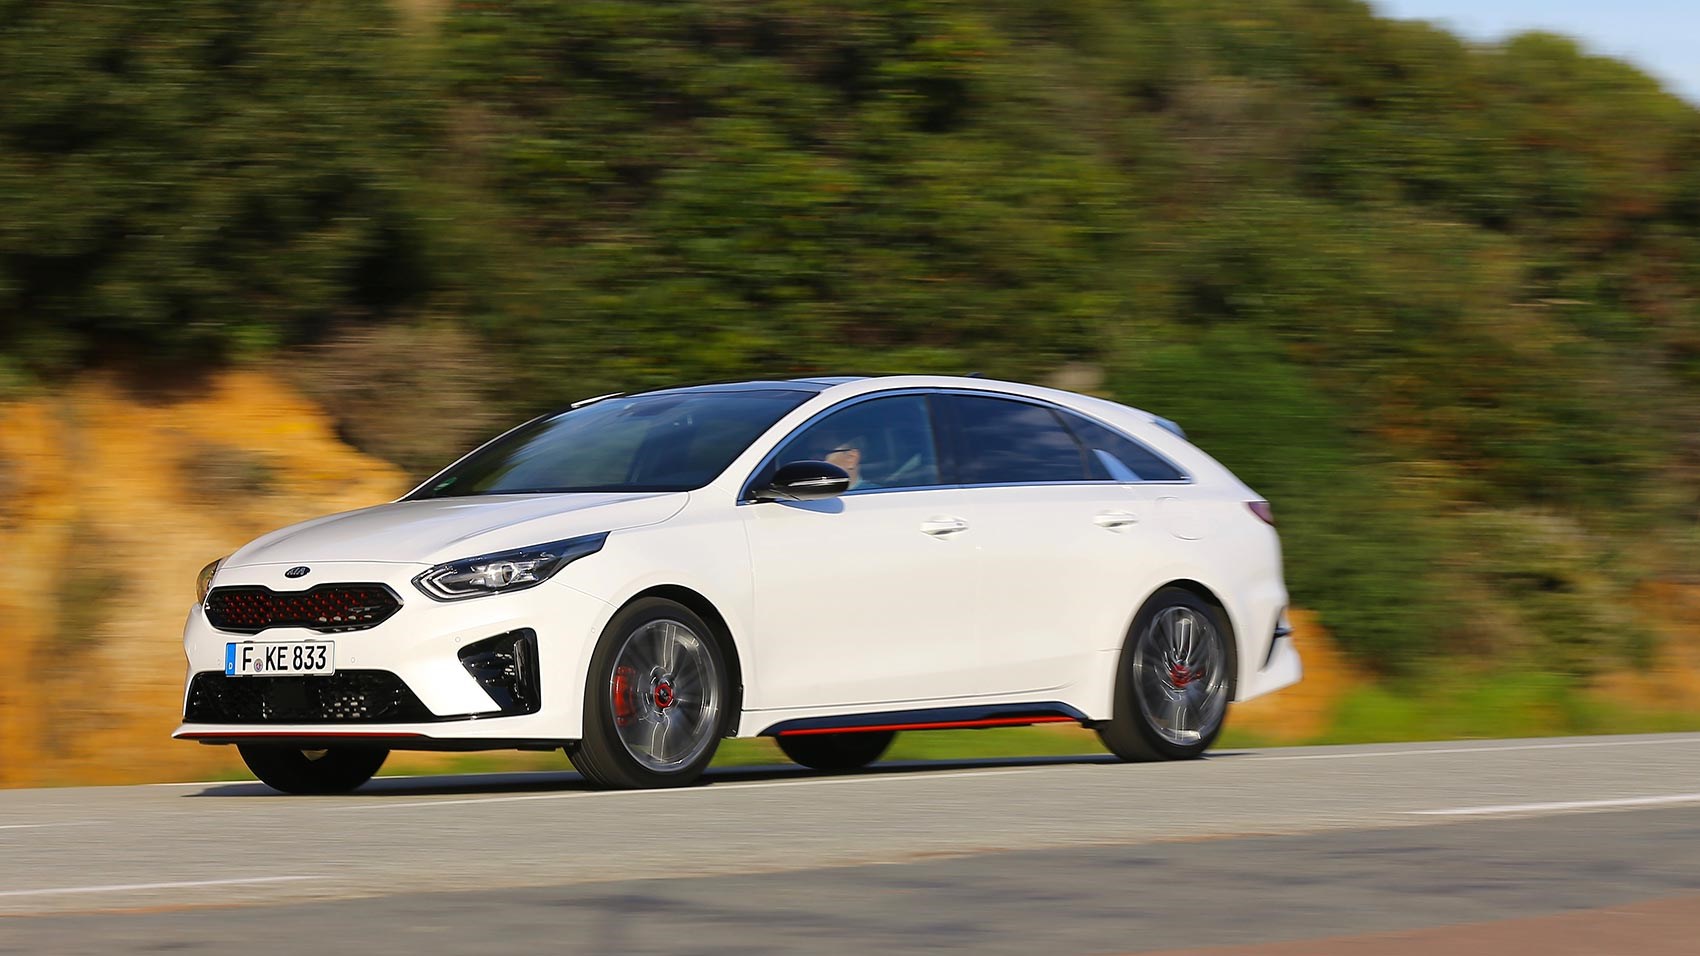 Kia Proceed review, Car review